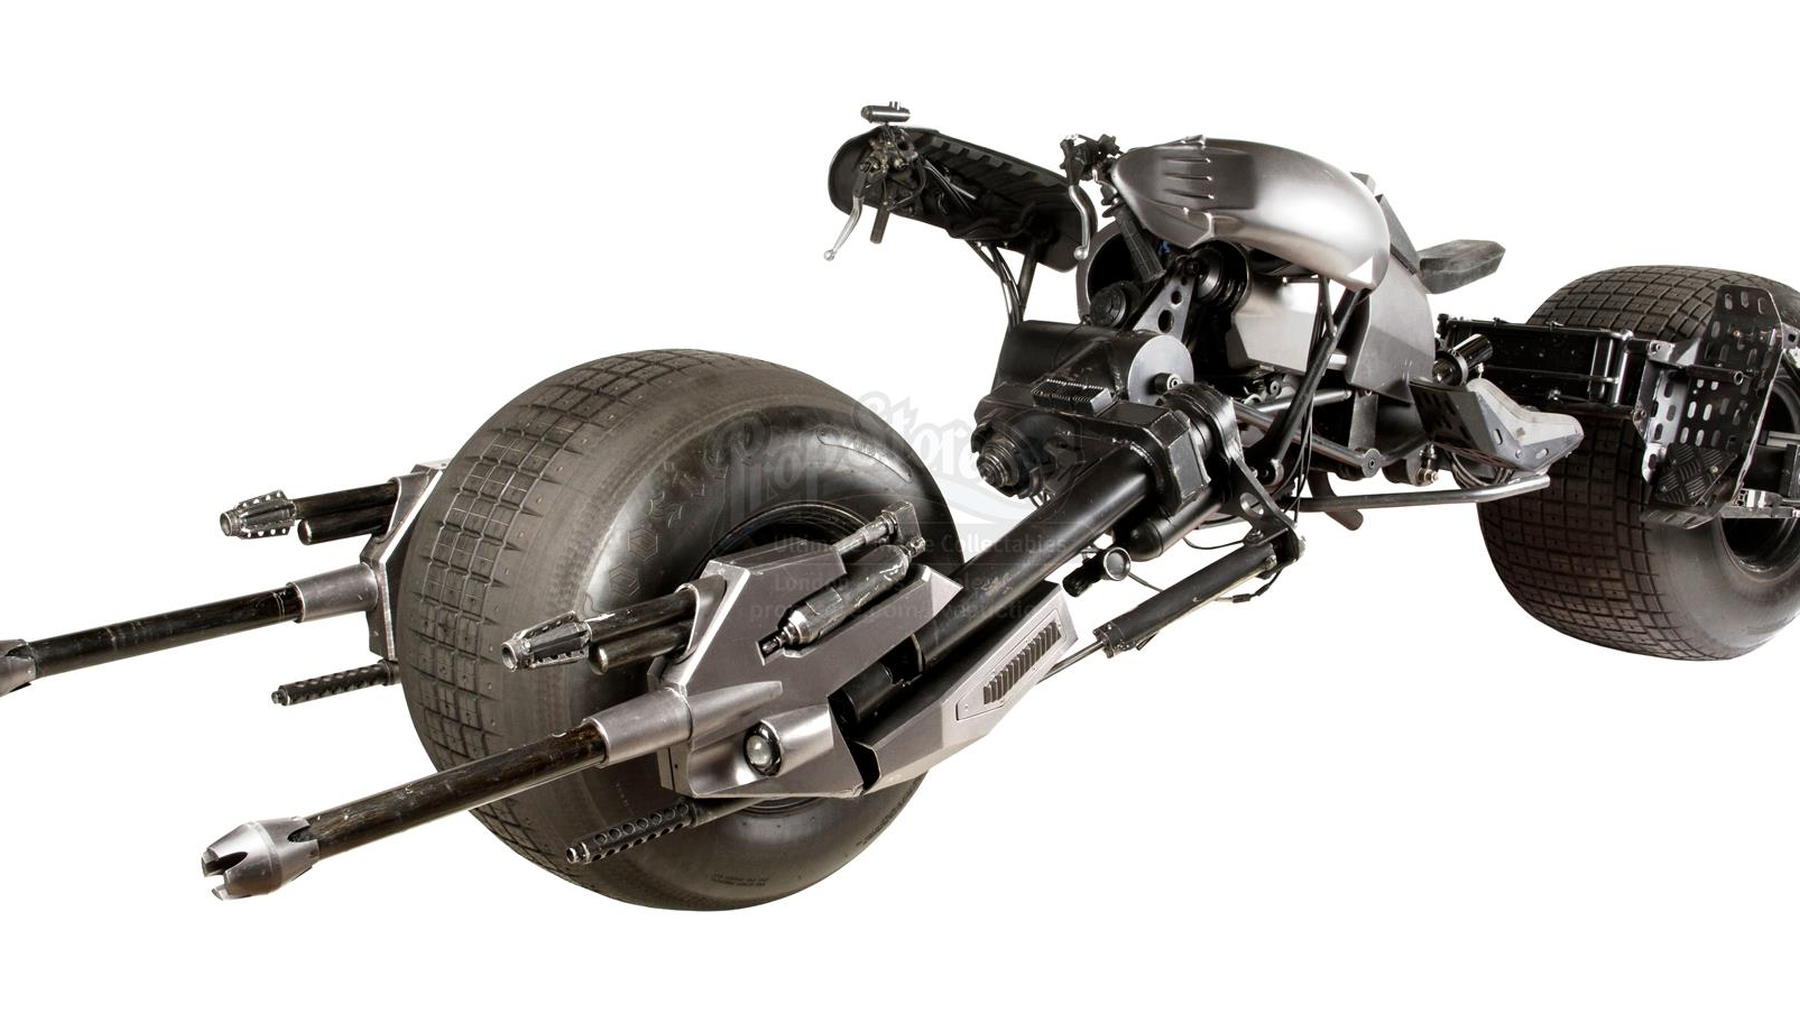 Someone rose up like the Dark Knight and bought the Batpod for $406k